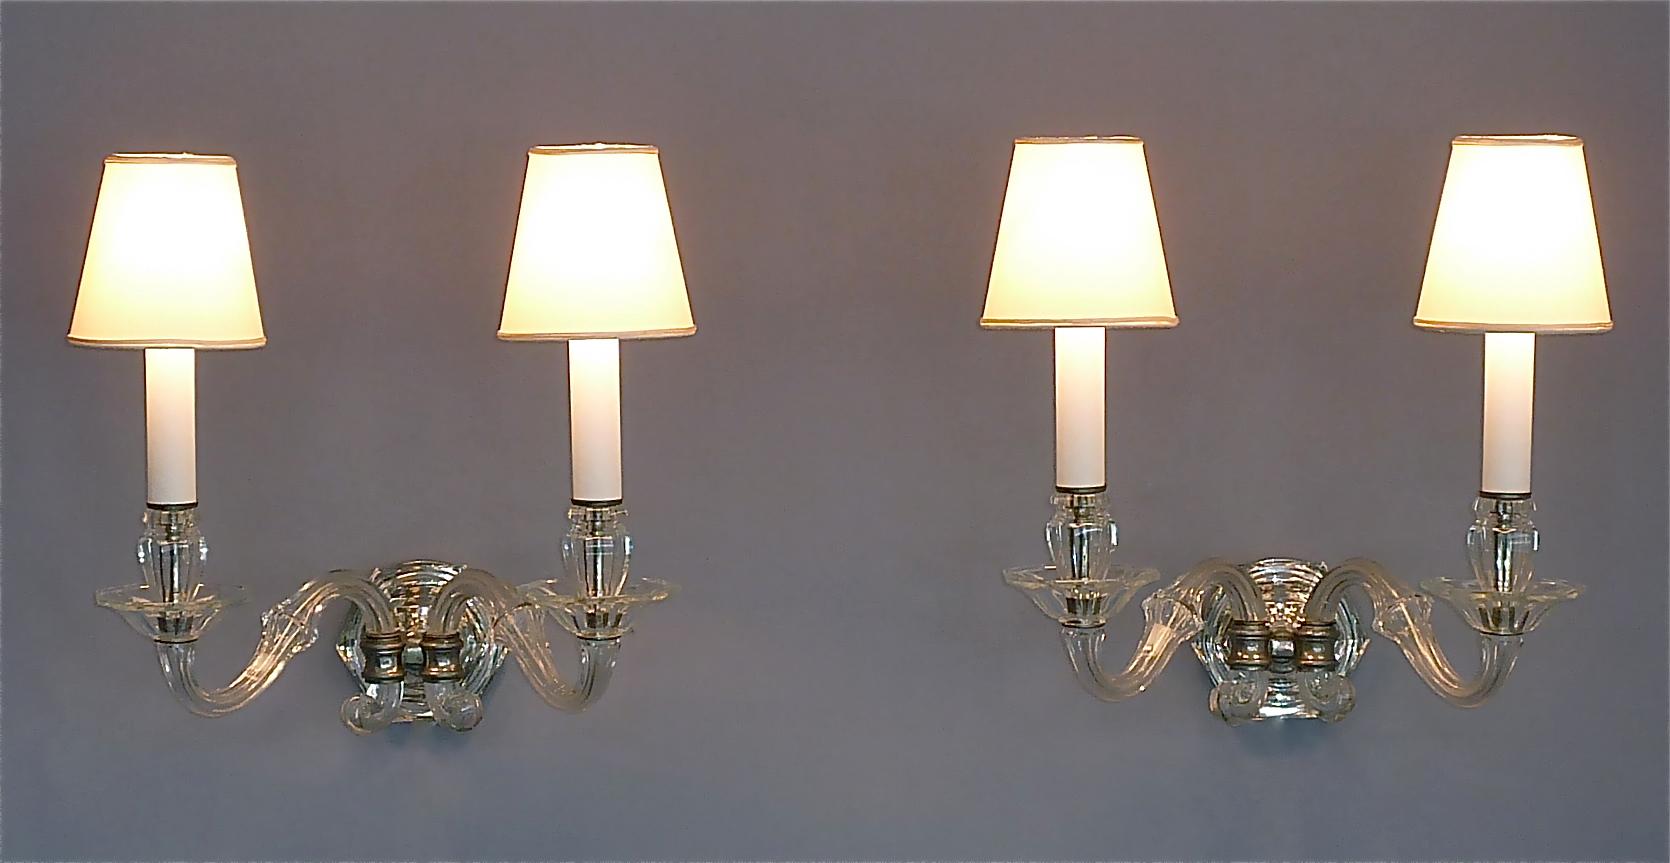 Pair of Art Deco Faceted Crystal Glass Wall Lights Sconces 1920, Baccarat Style 10